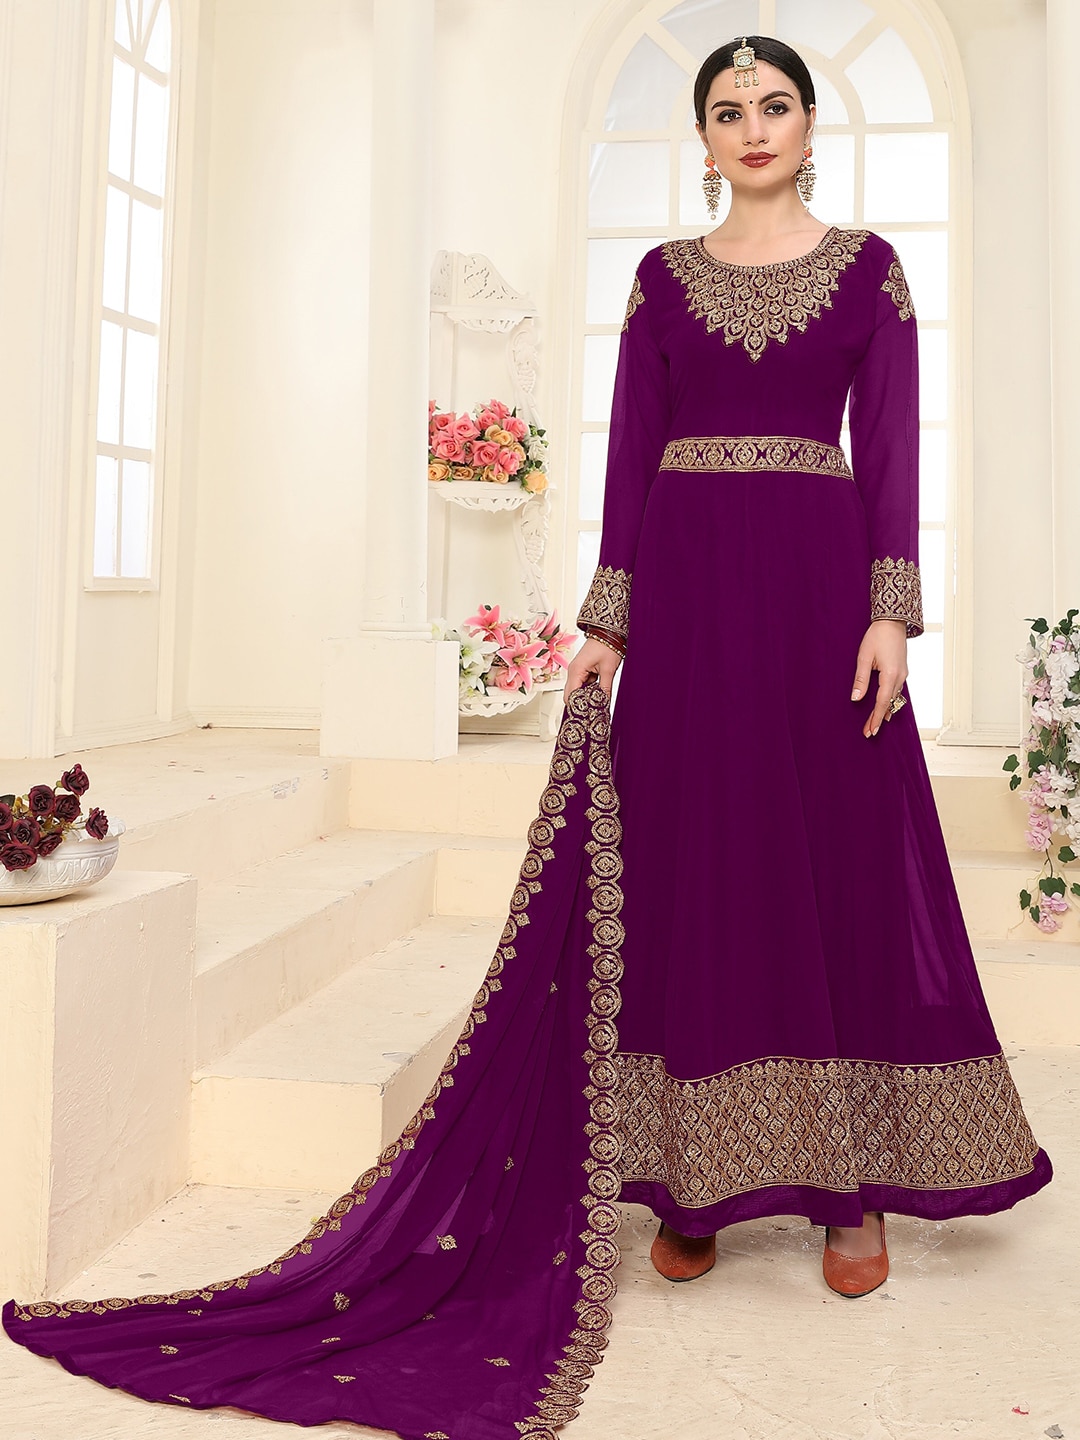 Divine International Trading Co Purple & Gold-Toned Embroidered Unstitched Dress Material Price in India